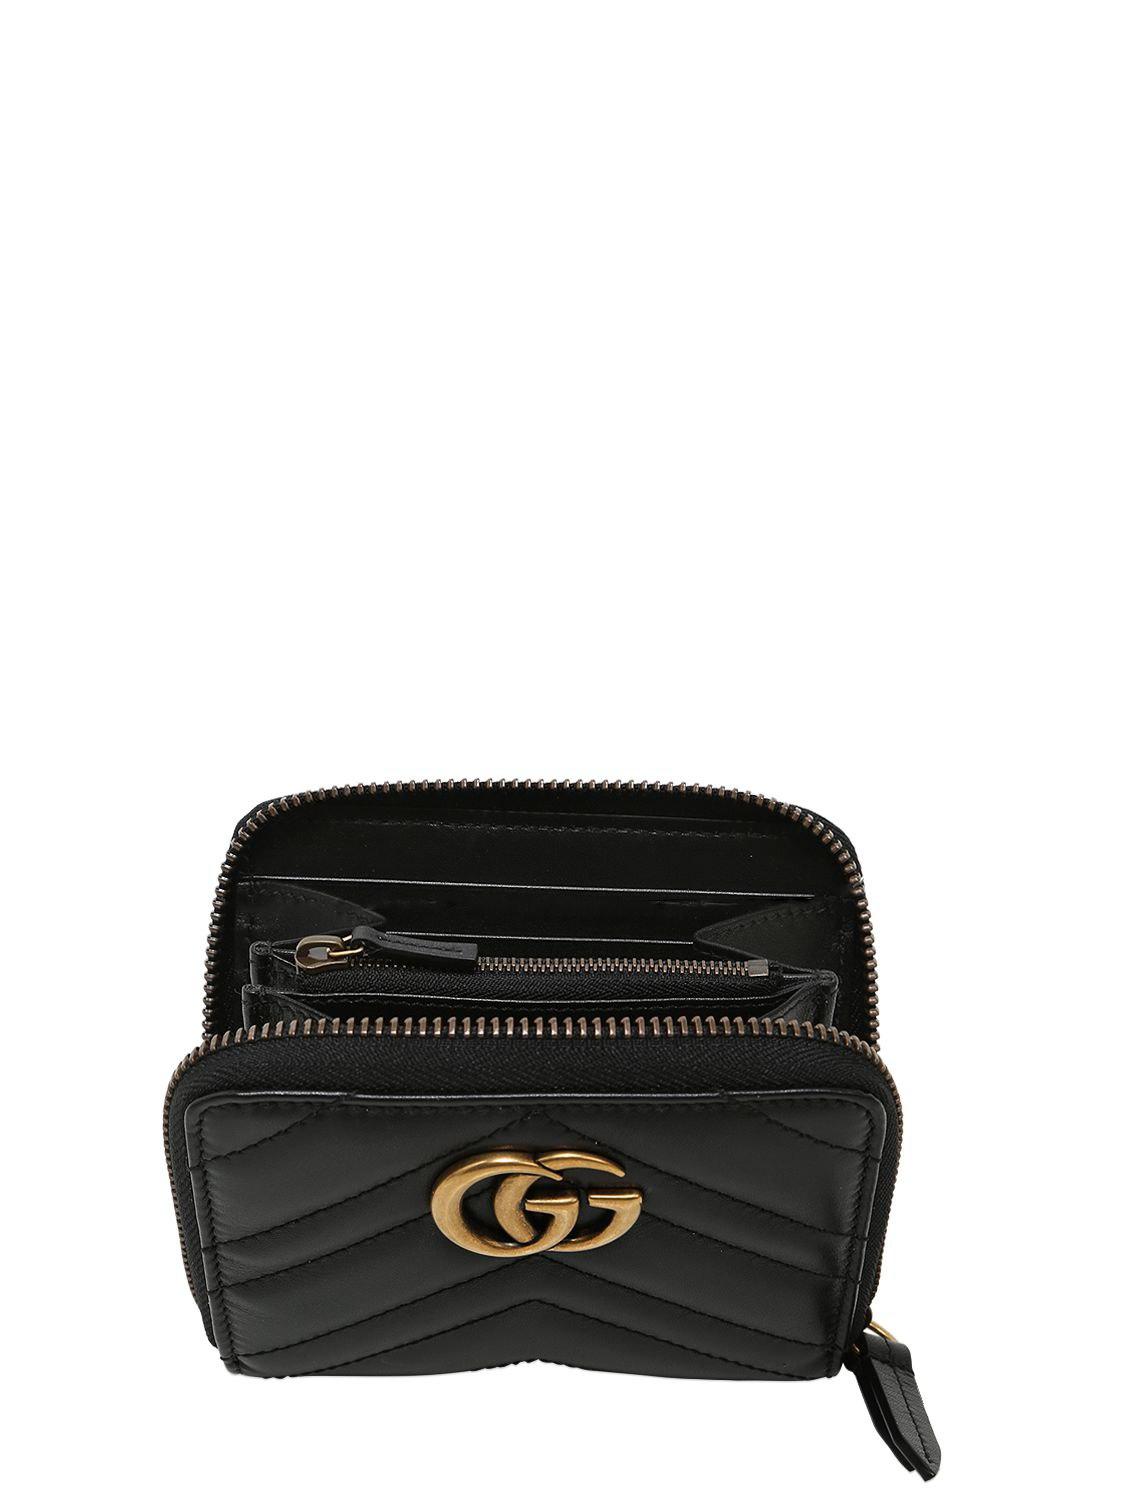 Gucci Small Gg Marmont 2.0 Leather Zip Wallet in Black | Lyst